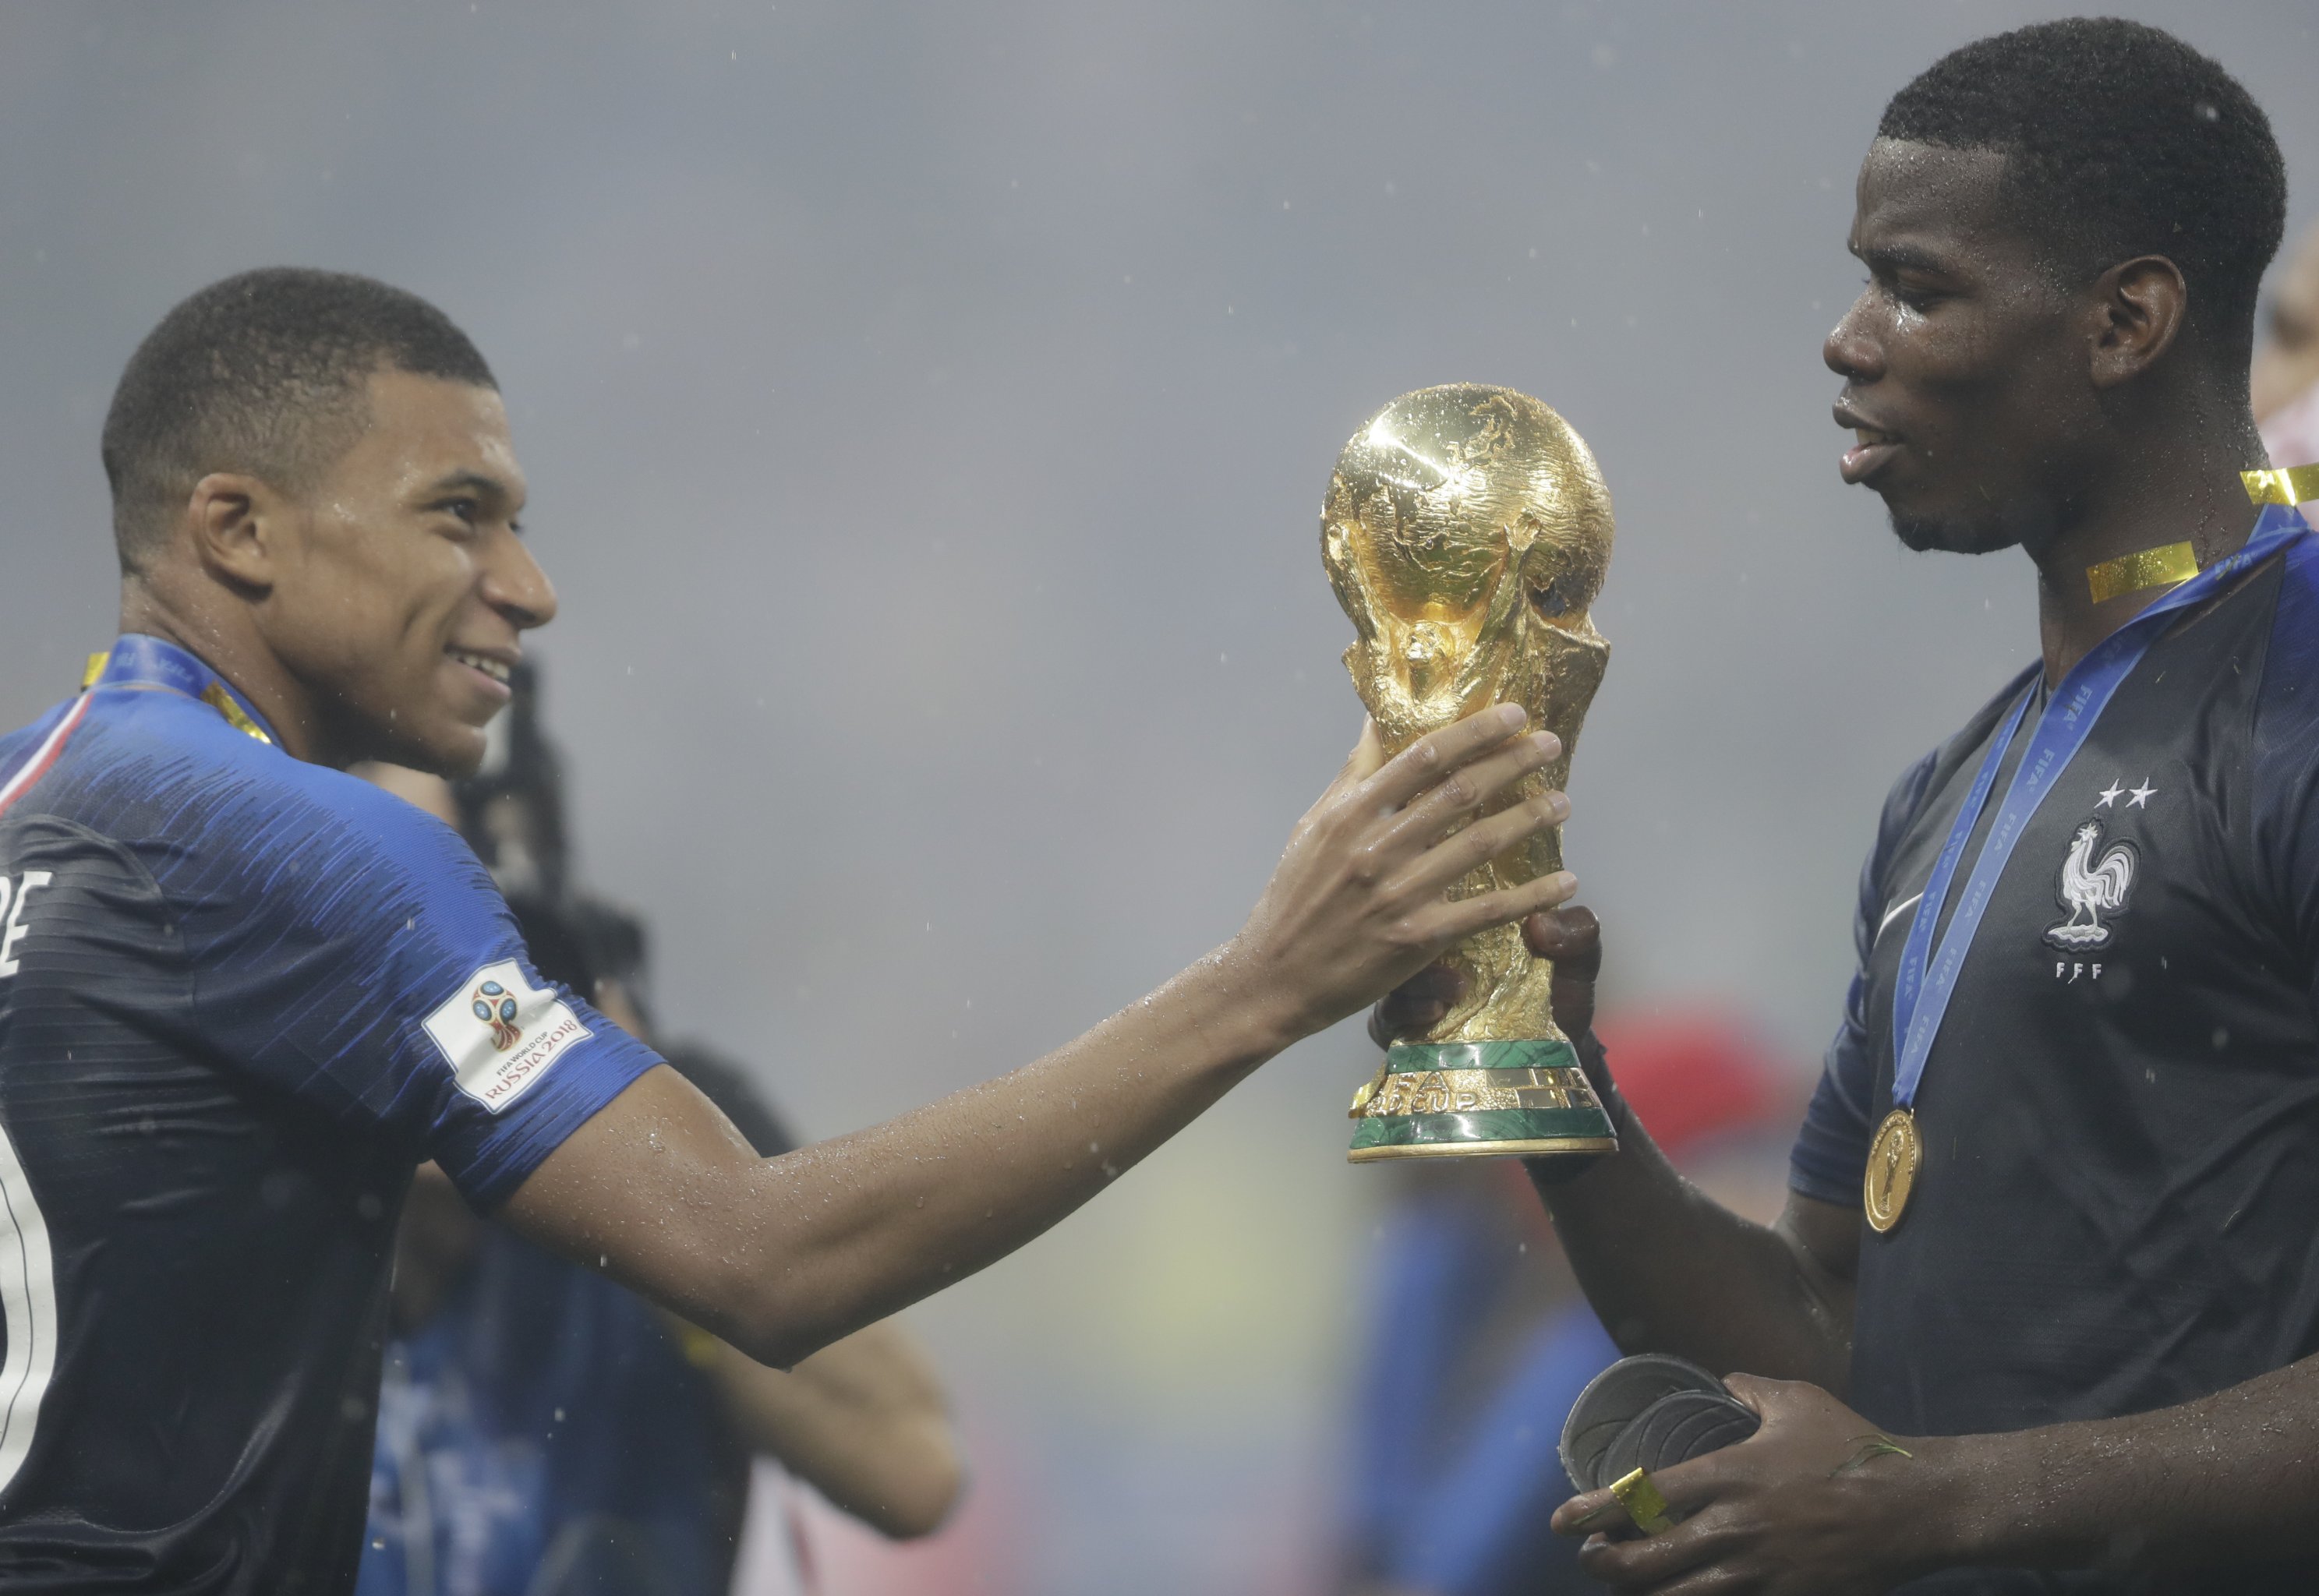 Paul Pogba Marcus Rashford And Kylian Mbappe Are The Future Of Football Bleacher Report Latest News Videos And Highlights